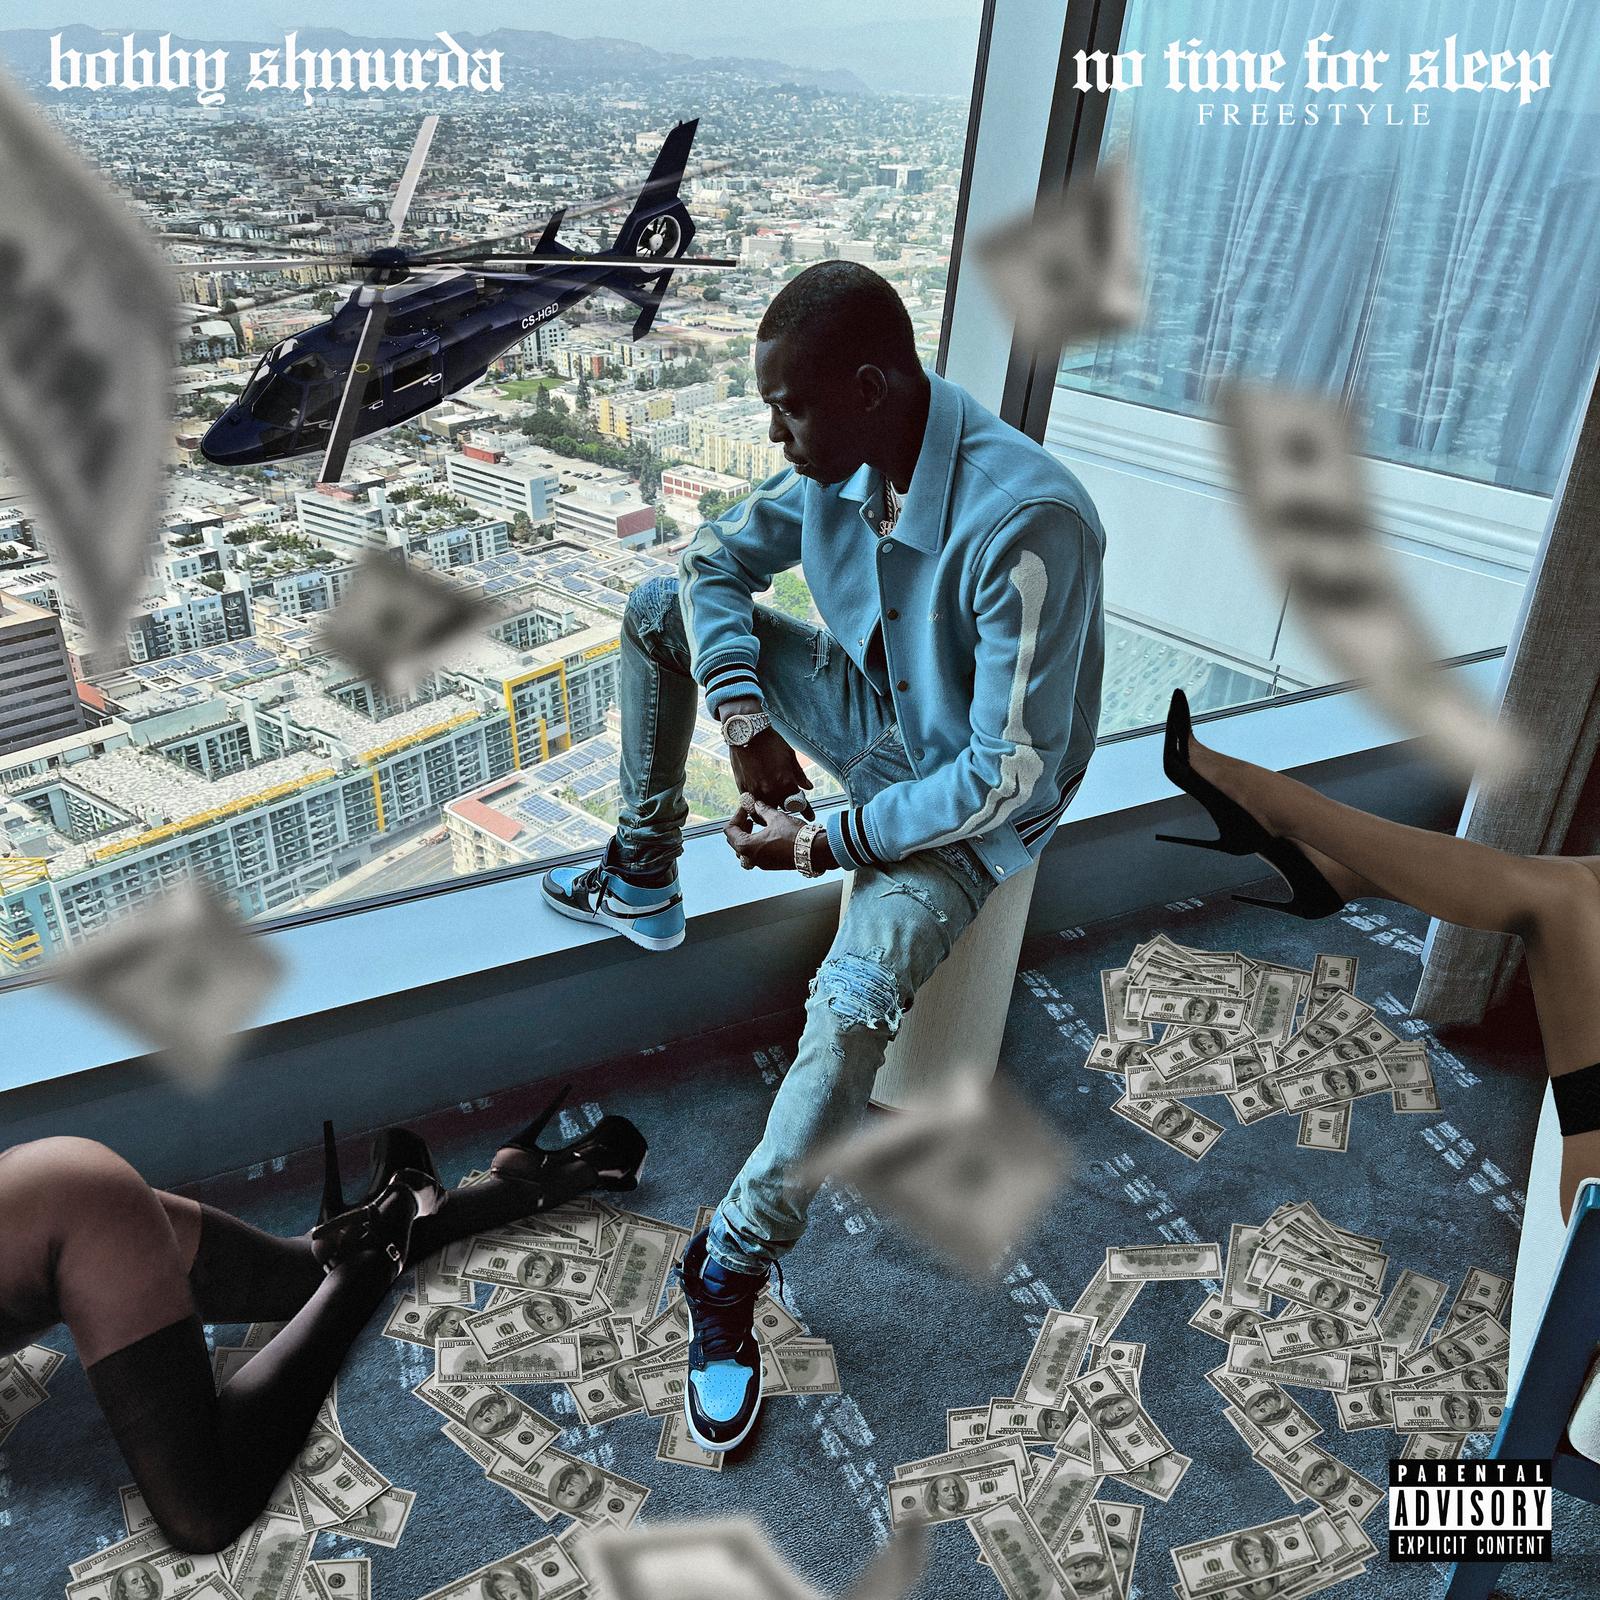 Art for No Time For Sleep (Freestyle) (Clean) by Bobby Shmurda